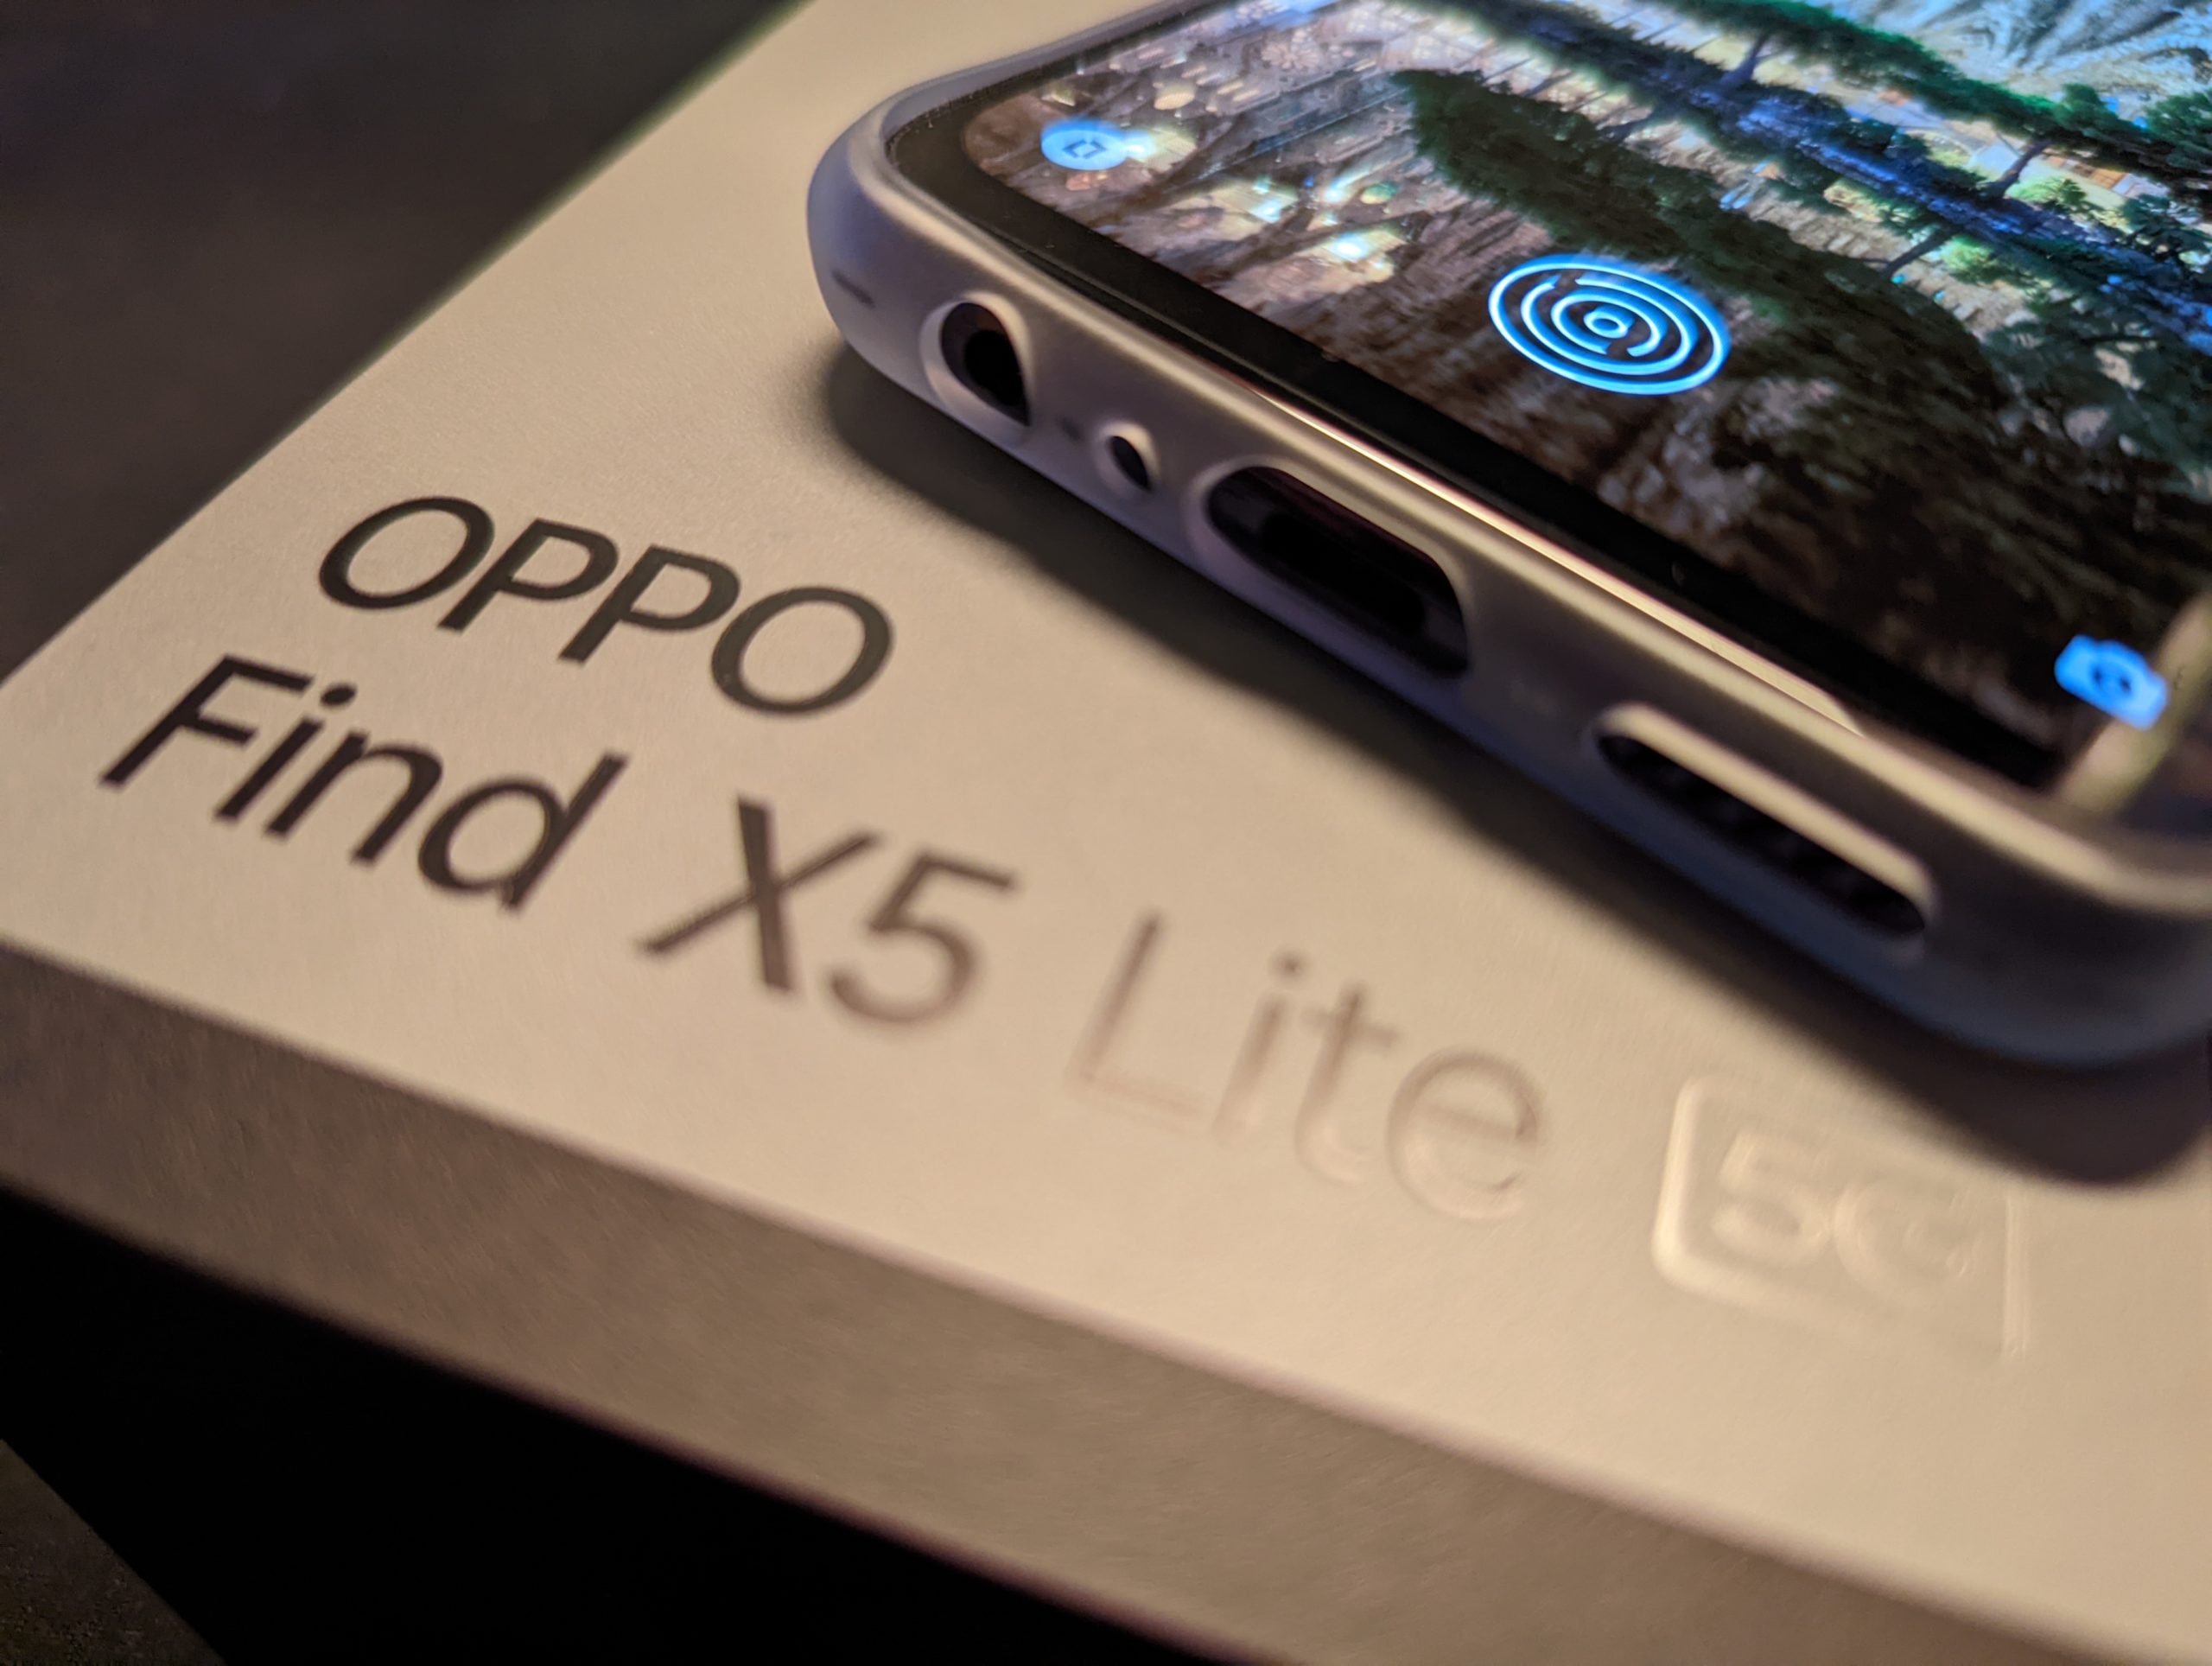 Oppo Find X5 Lite Specifications, Pros and Cons